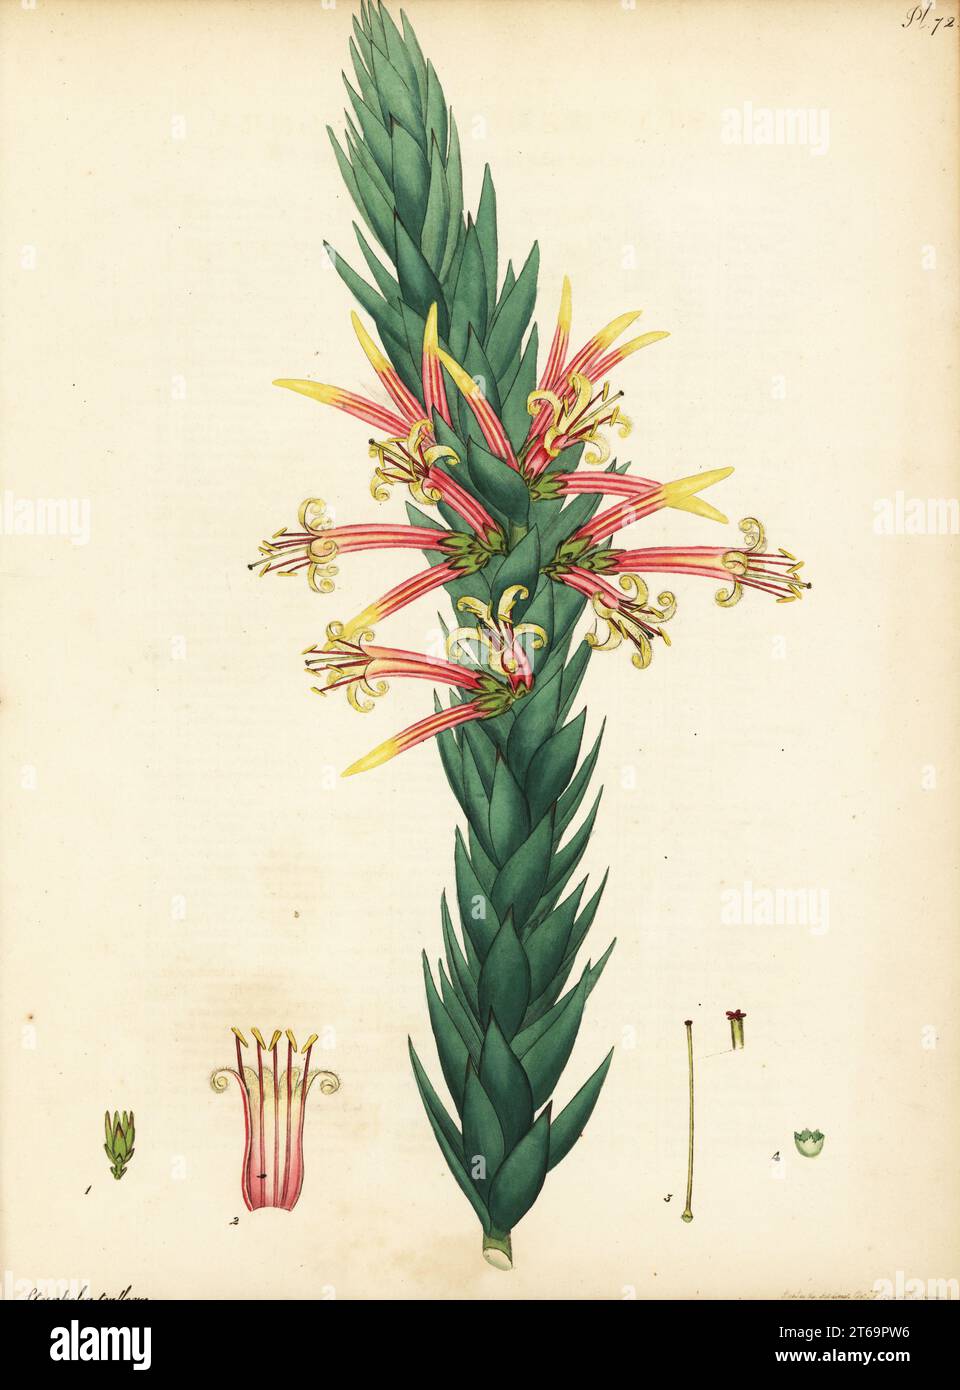 Pink five-corners, Three-flowered styphelia, Styphelia triflora. Native to New South Wales and Queensland. Copperplate engraving drawn, engraved and hand-coloured by Henry Andrews from his Botanical Register, Volume 1, published in London, 1799. Stock Photo